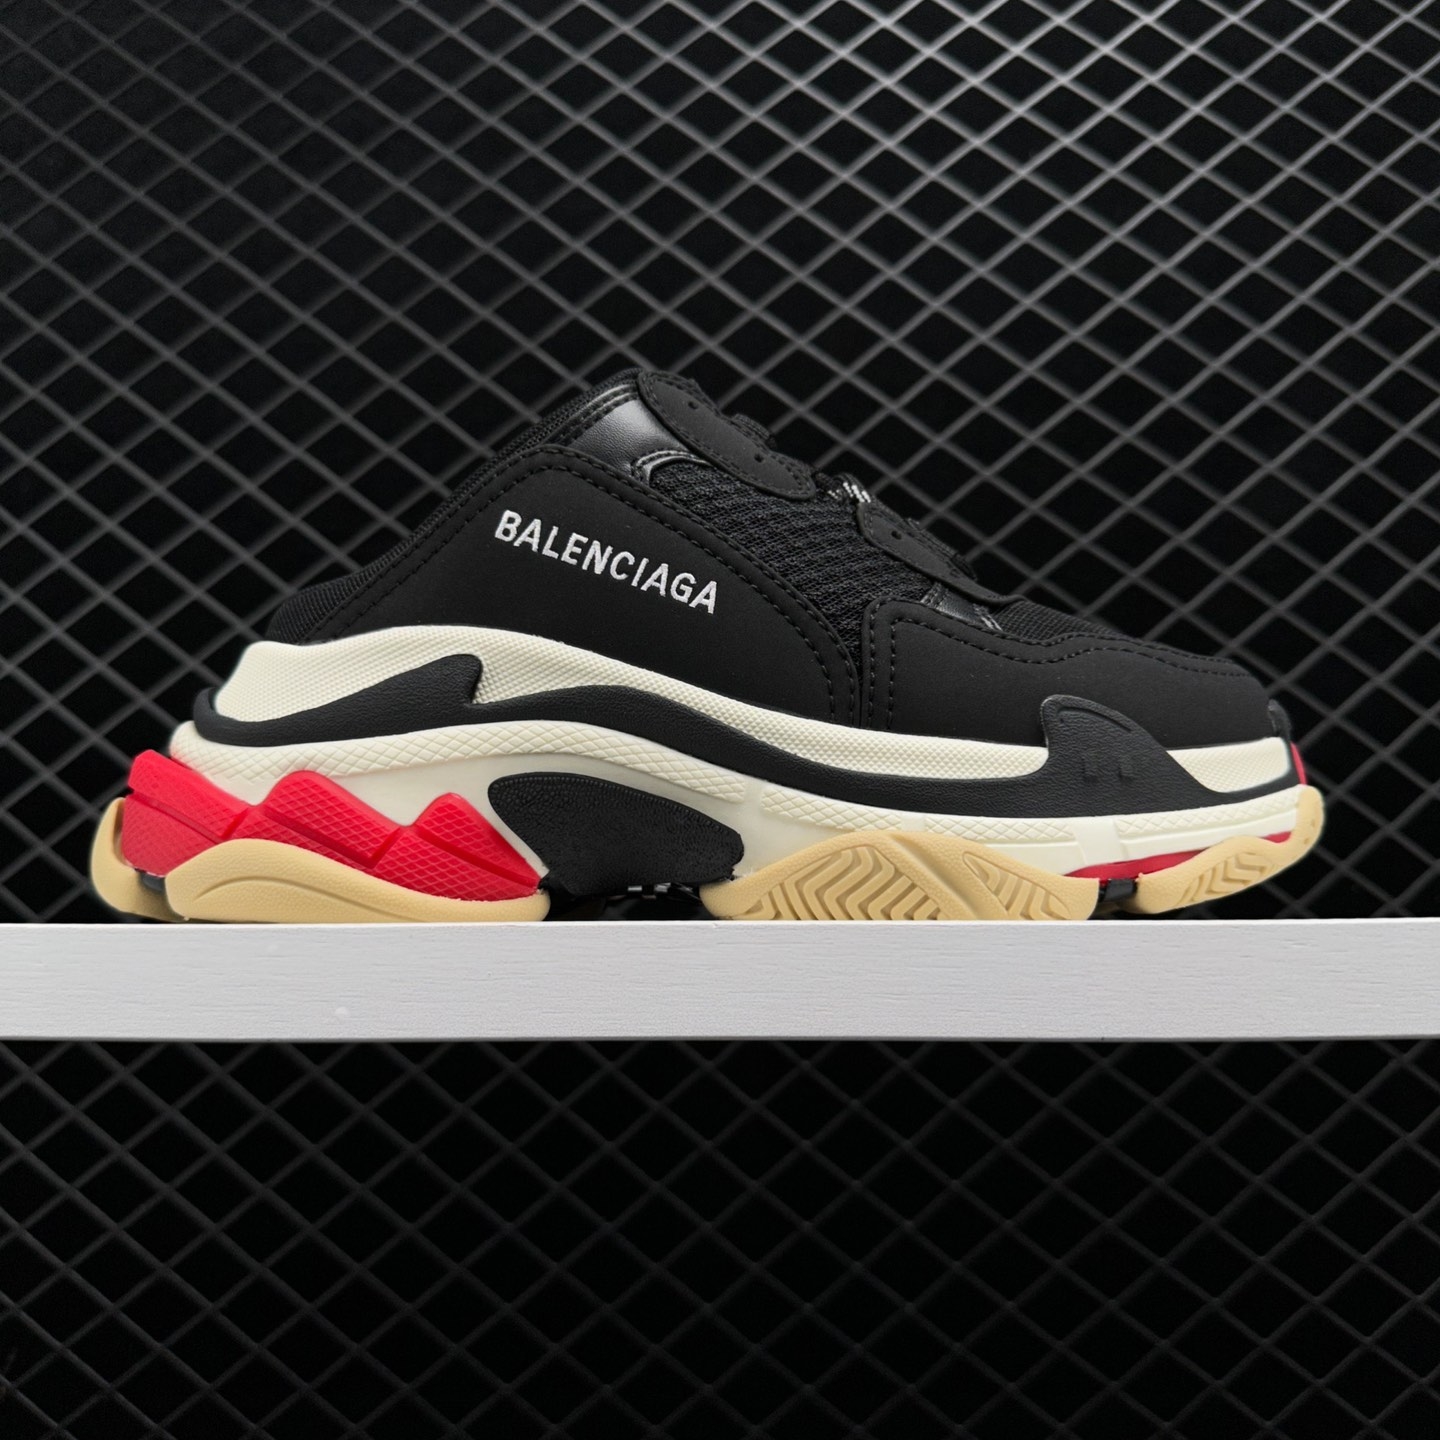 Balenciaga Triple S Black White Red 2018 Reissue 524037W09O11000 | Limited Edition Sneakers